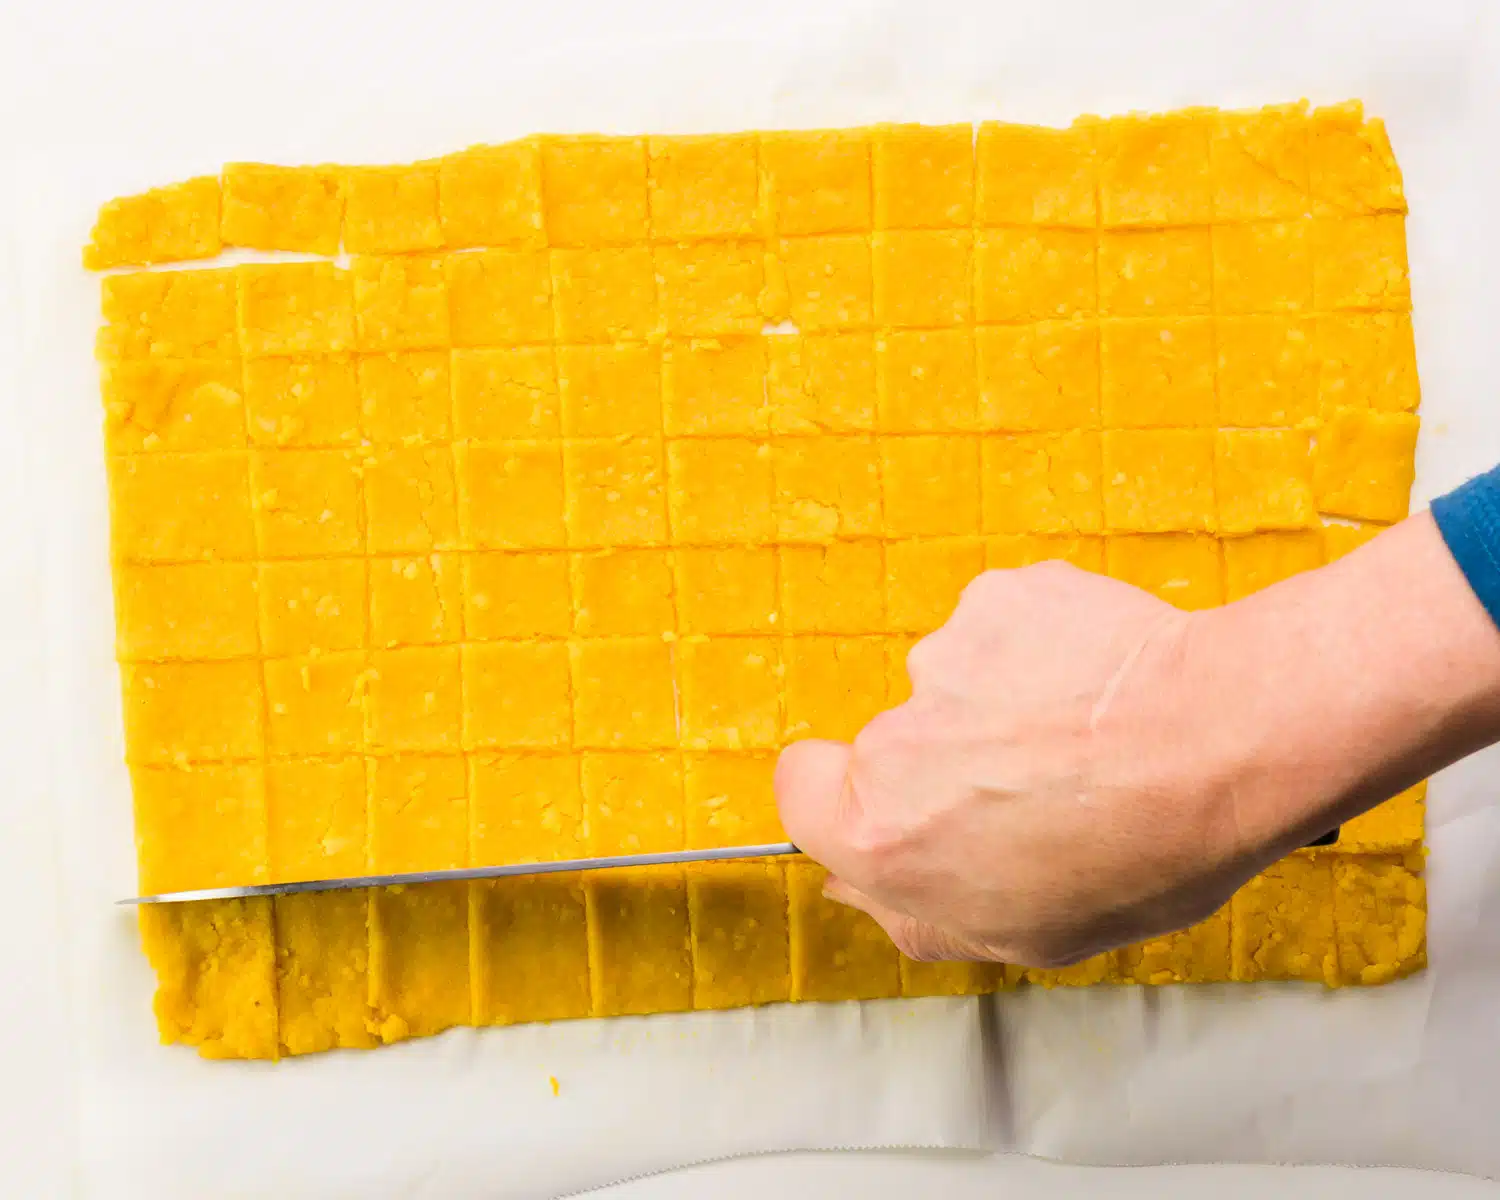 A hand holds a knife, cutting a thin orange dough into squares.